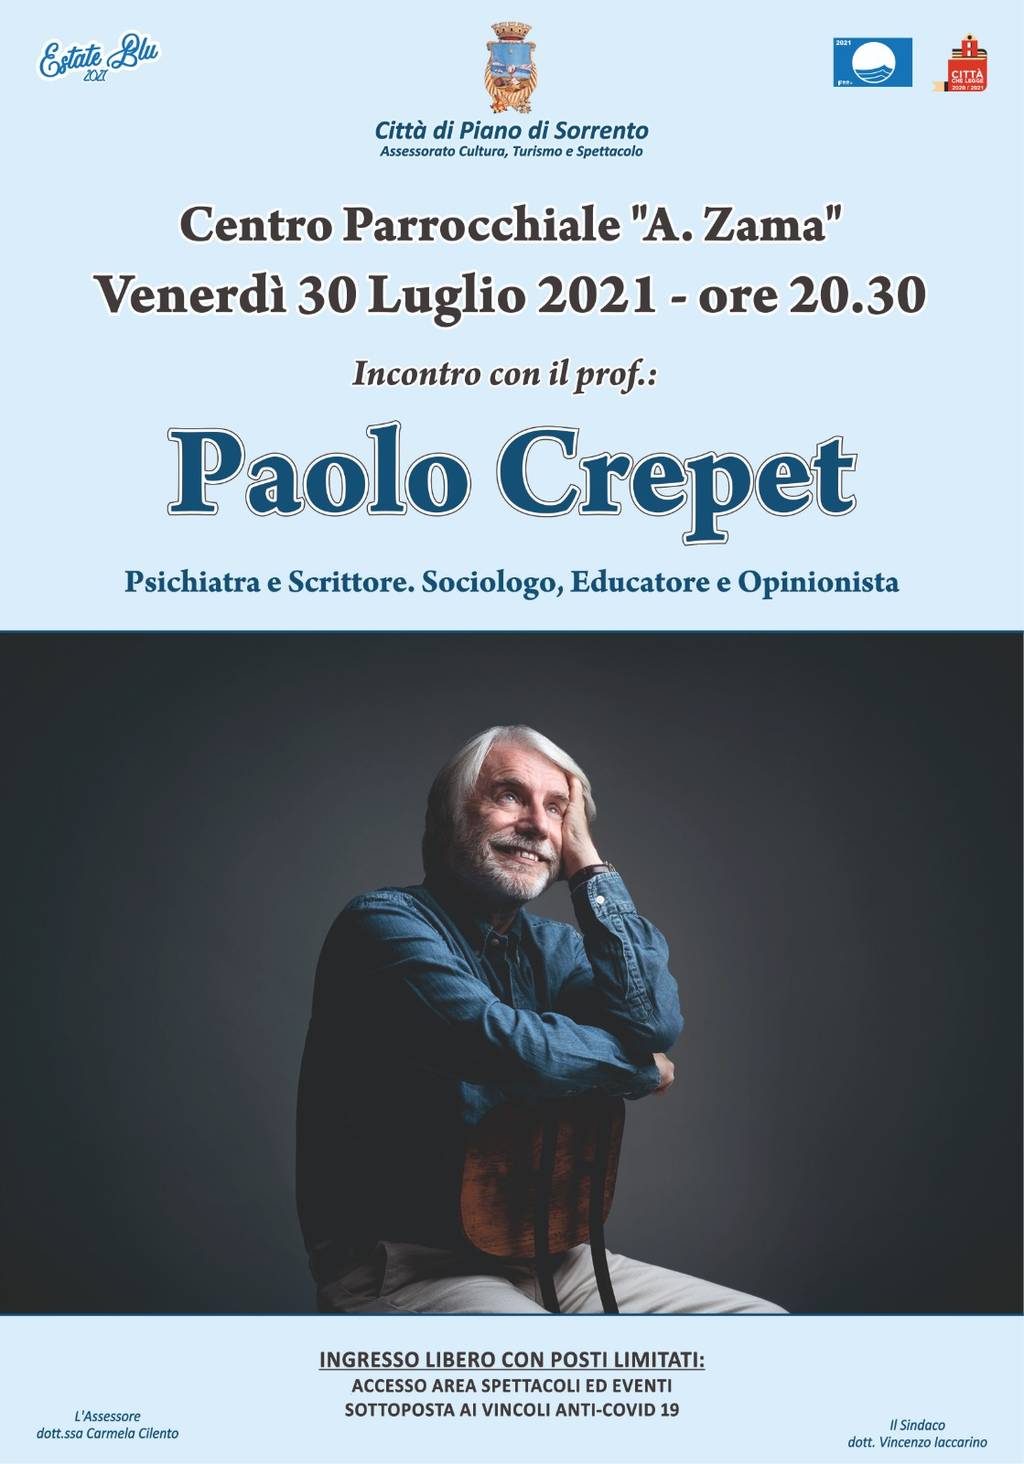 Meeting with Paolo Crepet